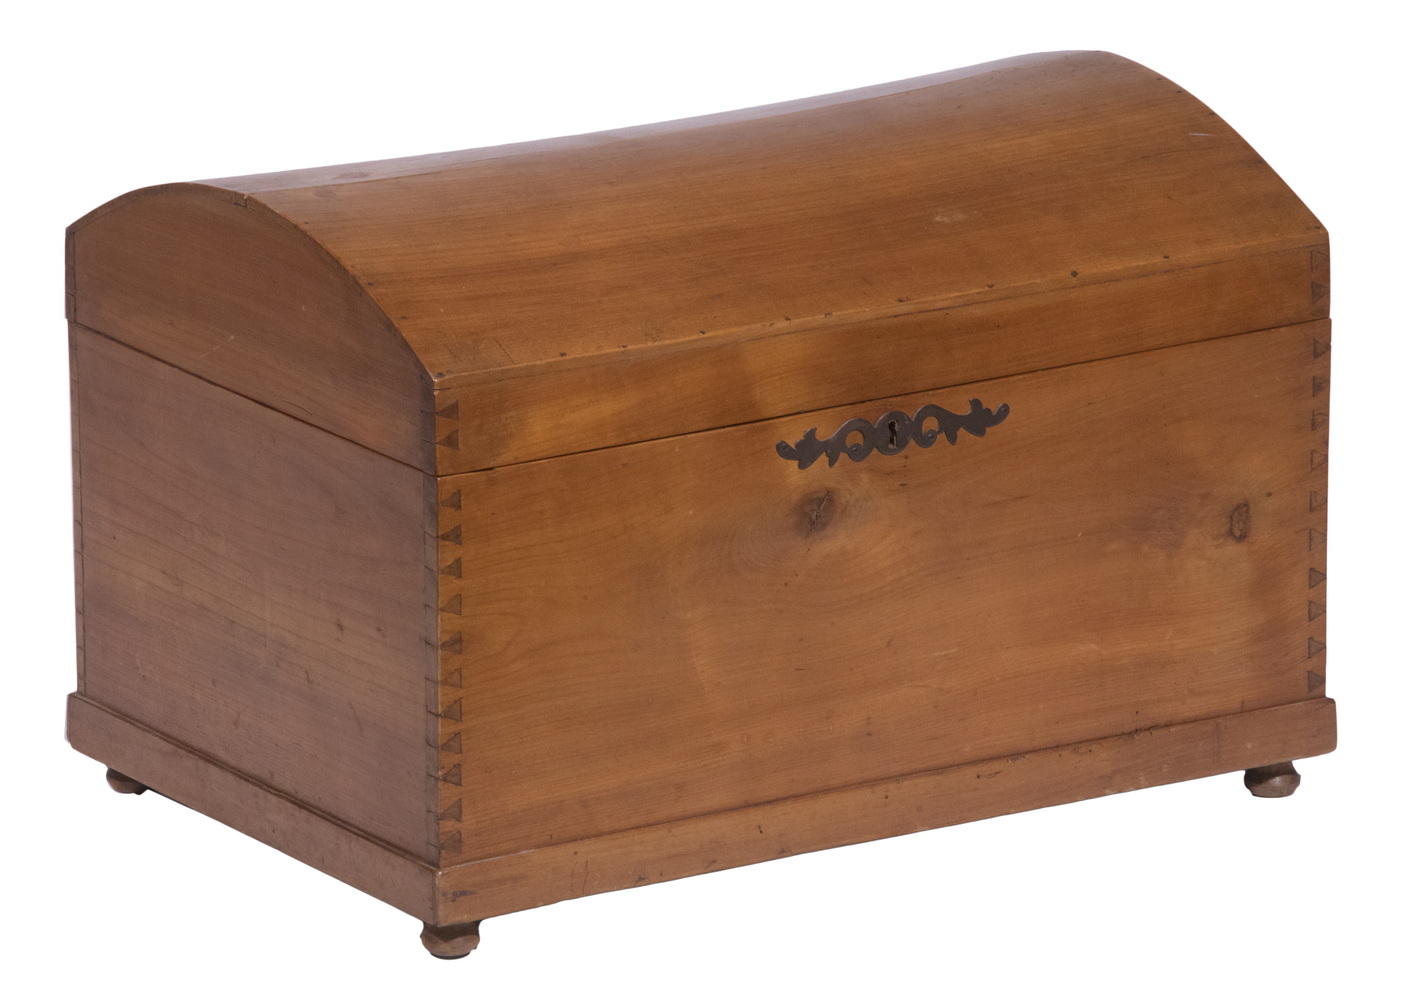 DOME TOP STORAGE TRUNK Soft Wood Chest,